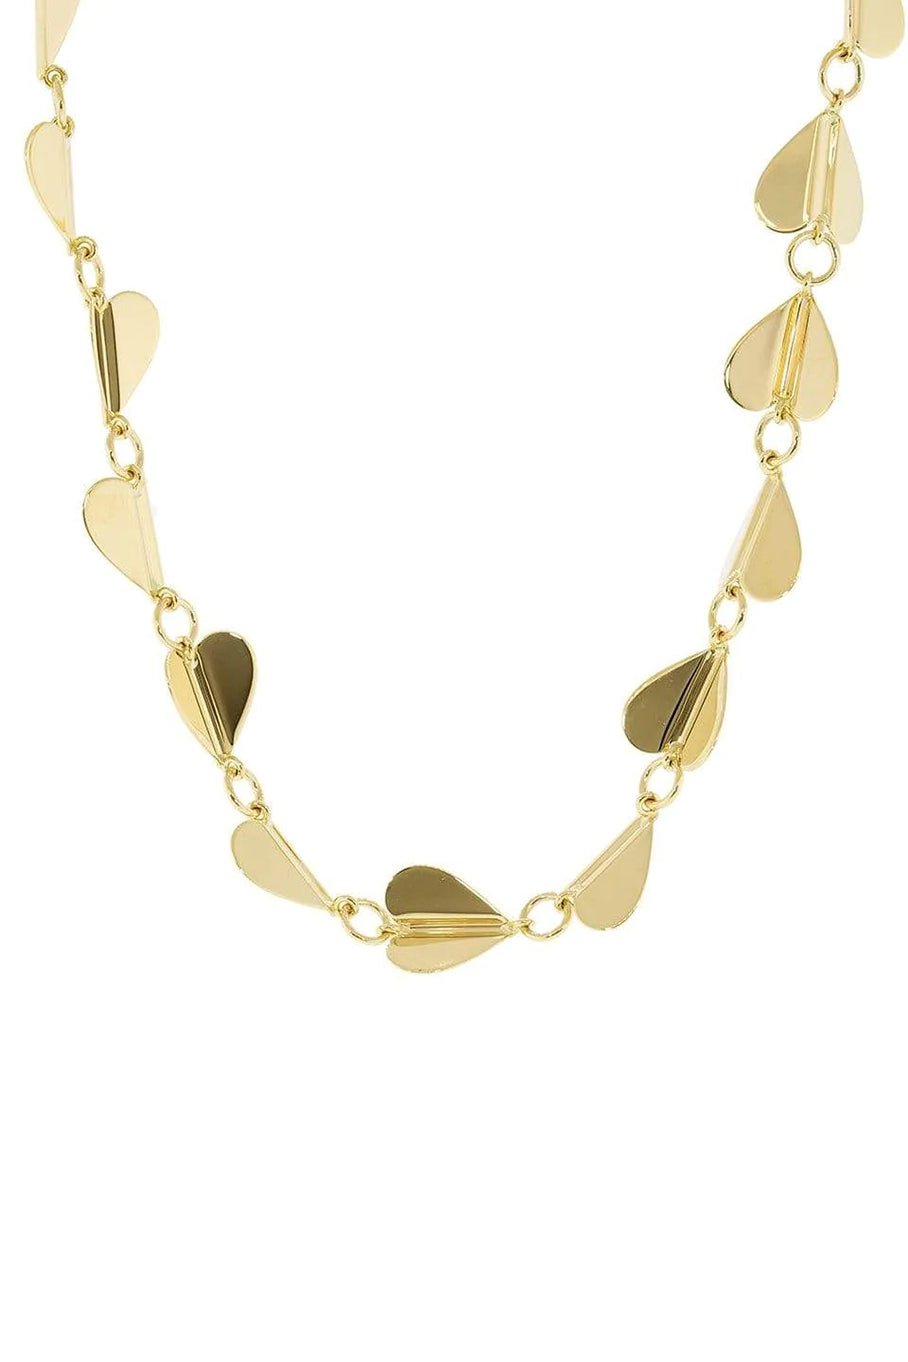 CADAR-Medium Wings of Love Necklace-YELLOW GOLD